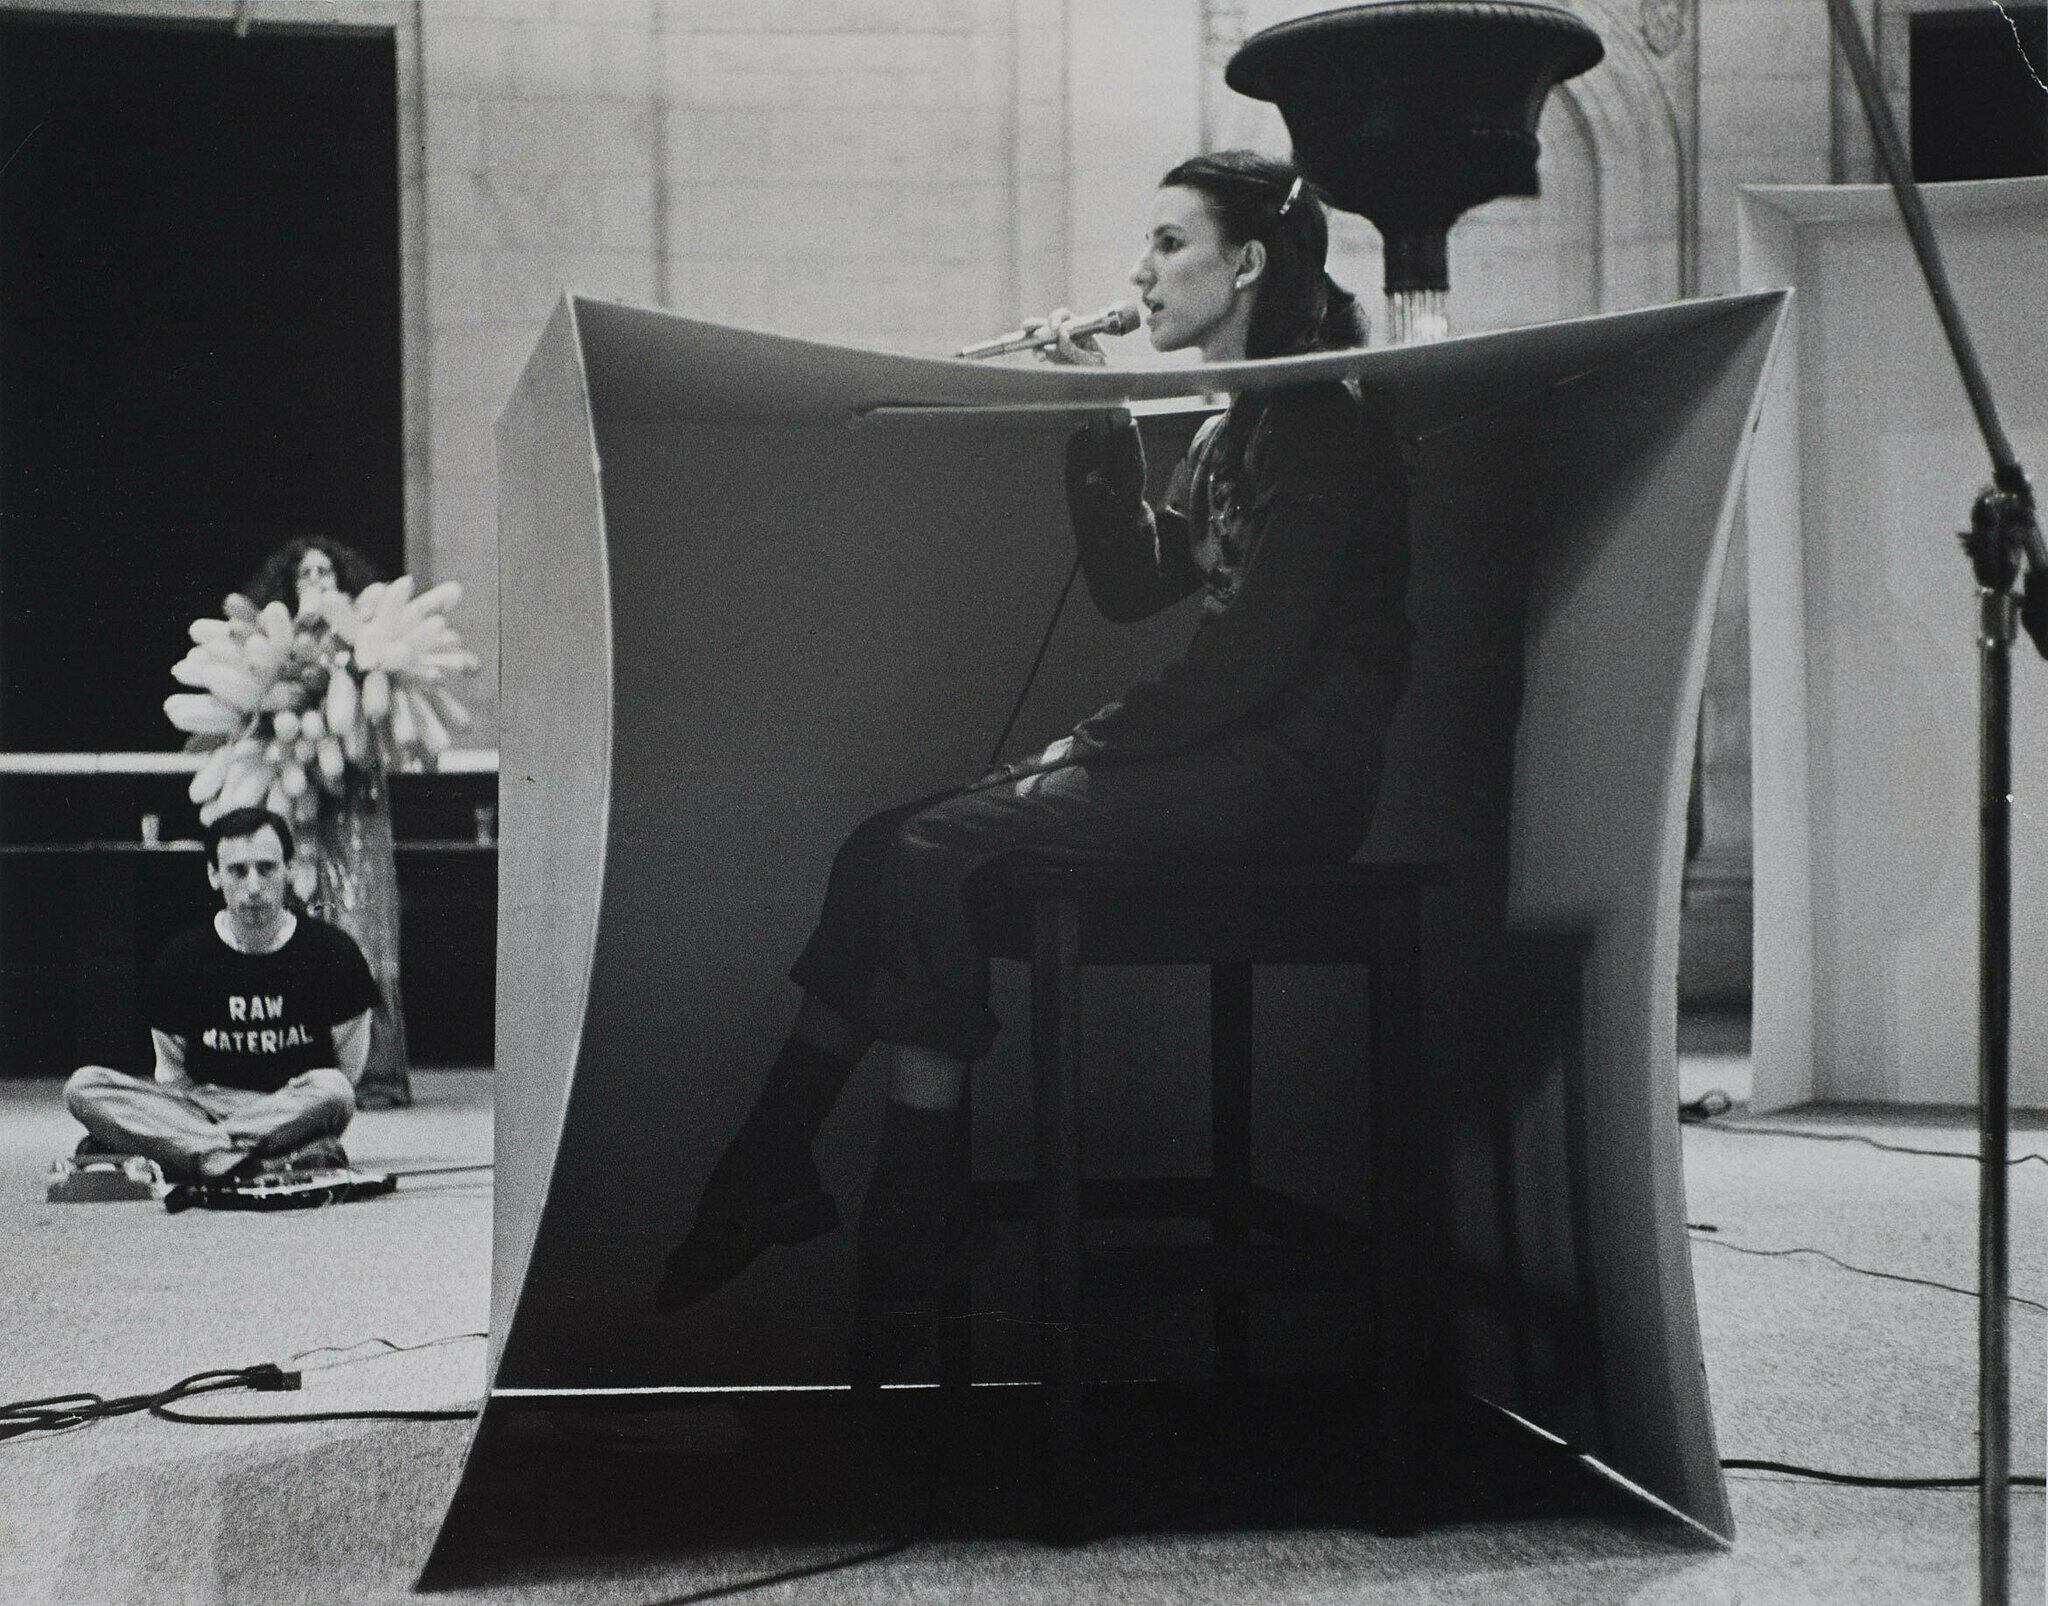 A woman holds a microphone to her mouth during a live art performance.